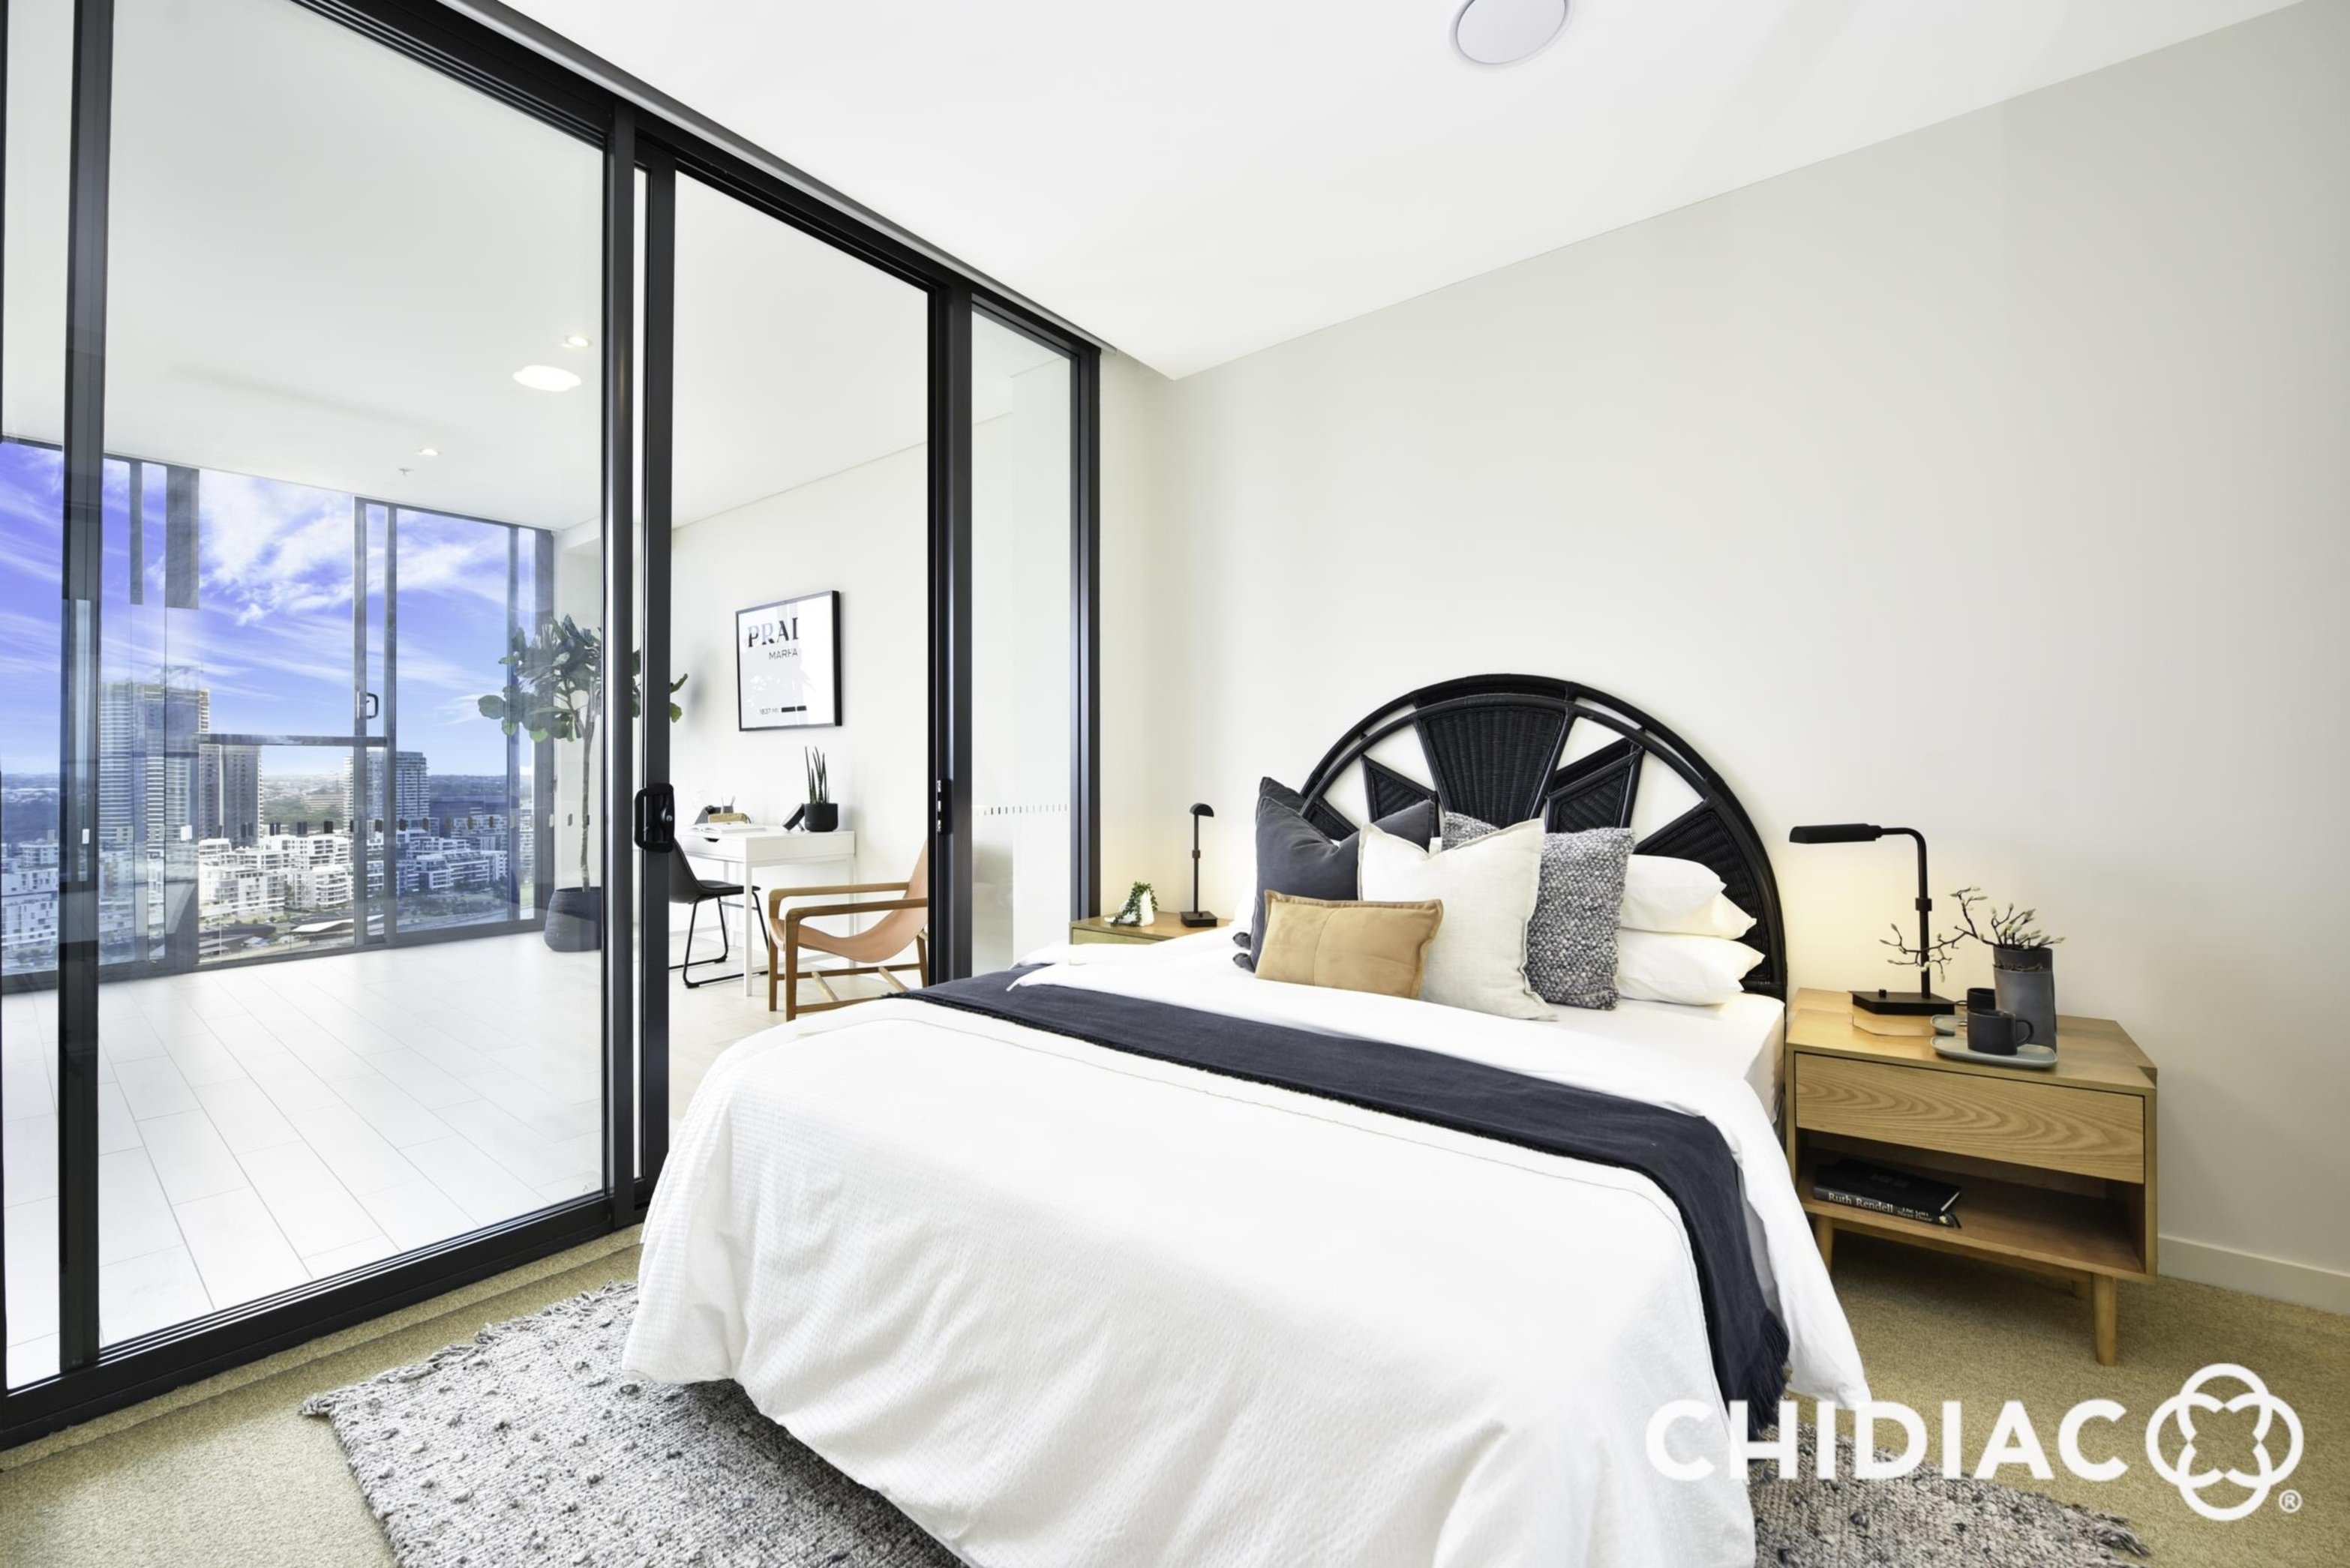 2403/11 Wentworth Place, Wentworth Point Leased by Chidiac Realty - image 7